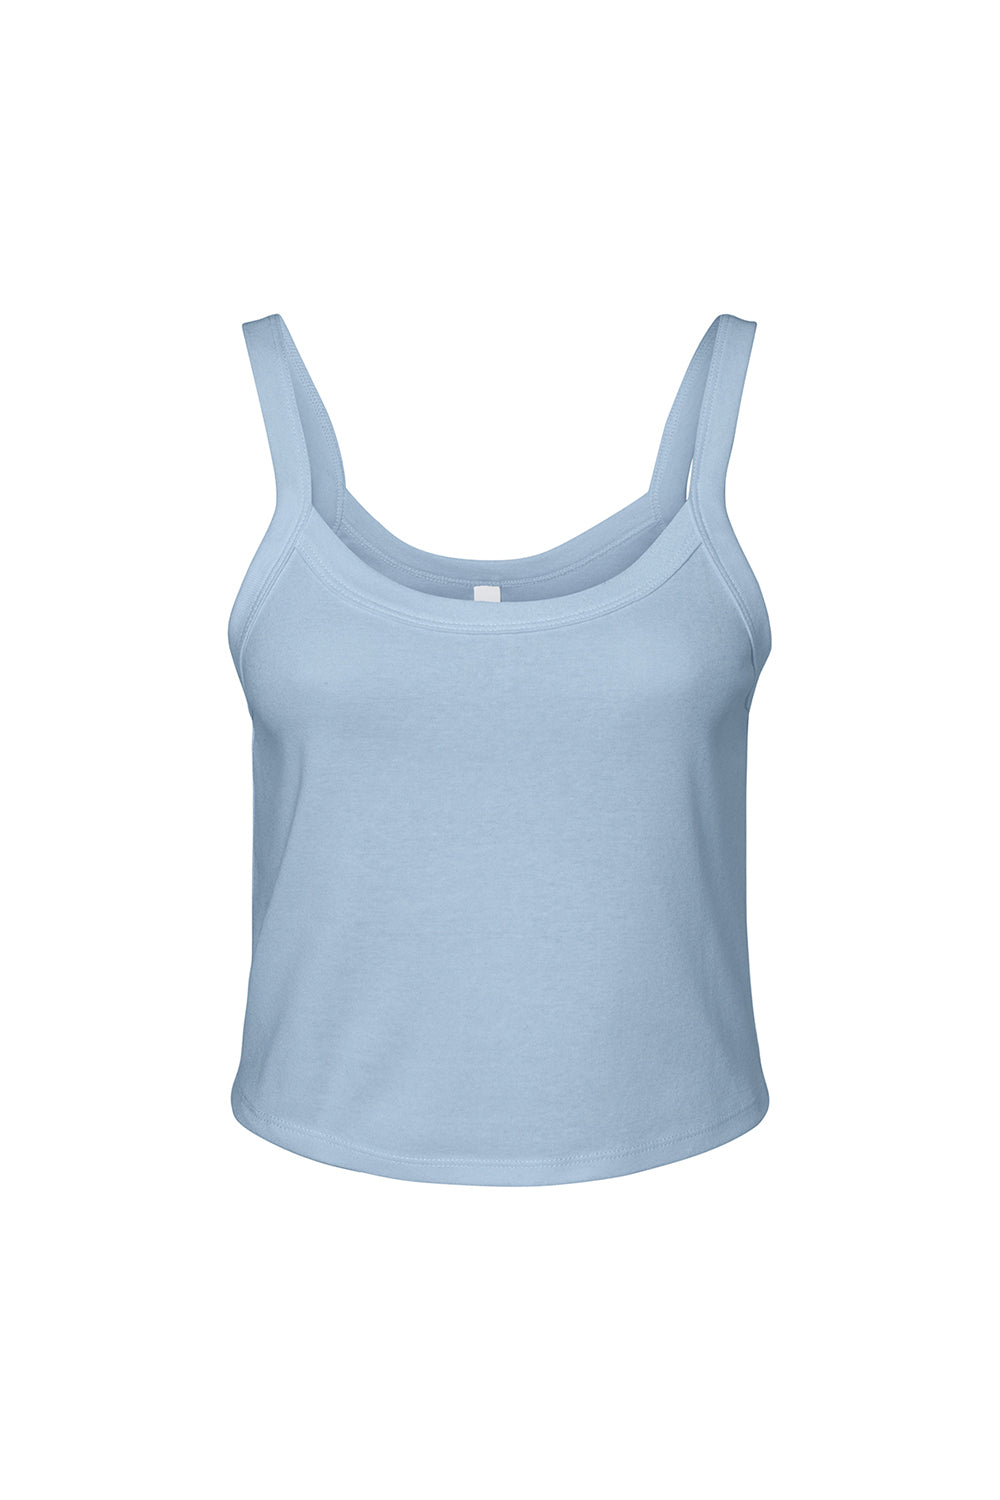 Bella + Canvas 1012BE Womens Micro Ribbed Scoop Tank Top Baby Blue Flat Front